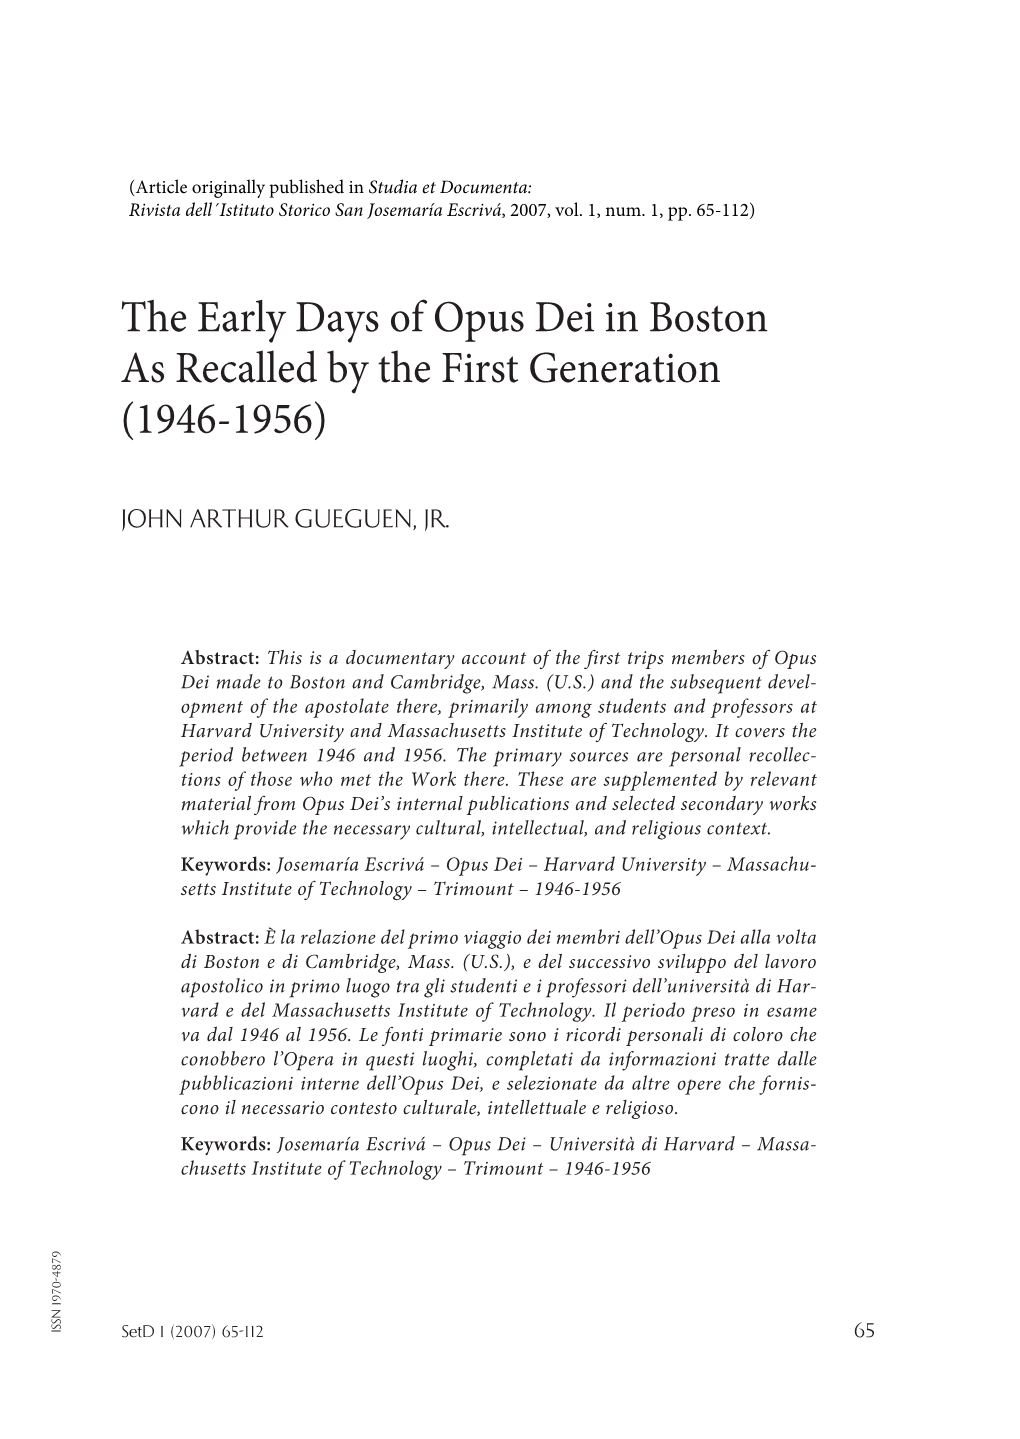 The Early Days of Opus Dei in Boston As Recalled by the First Generation (1946-1956)